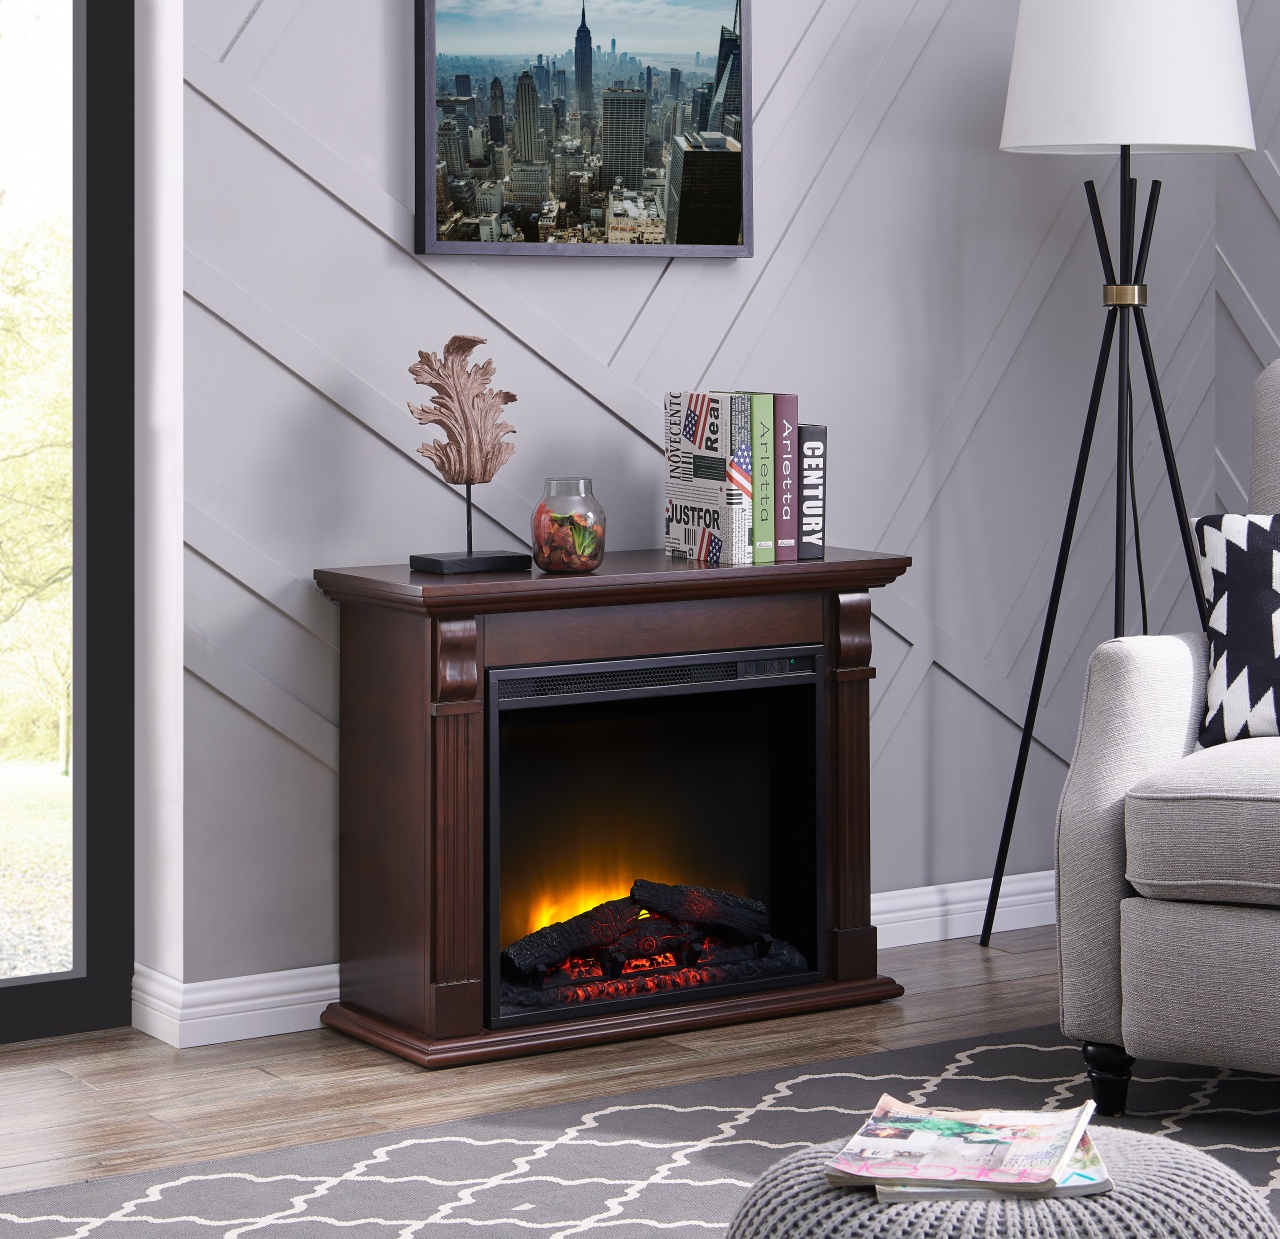 Tv Fire Wall Unique Indoor Outdoor Wood Burning Fireplace – Fireplace Ideas From